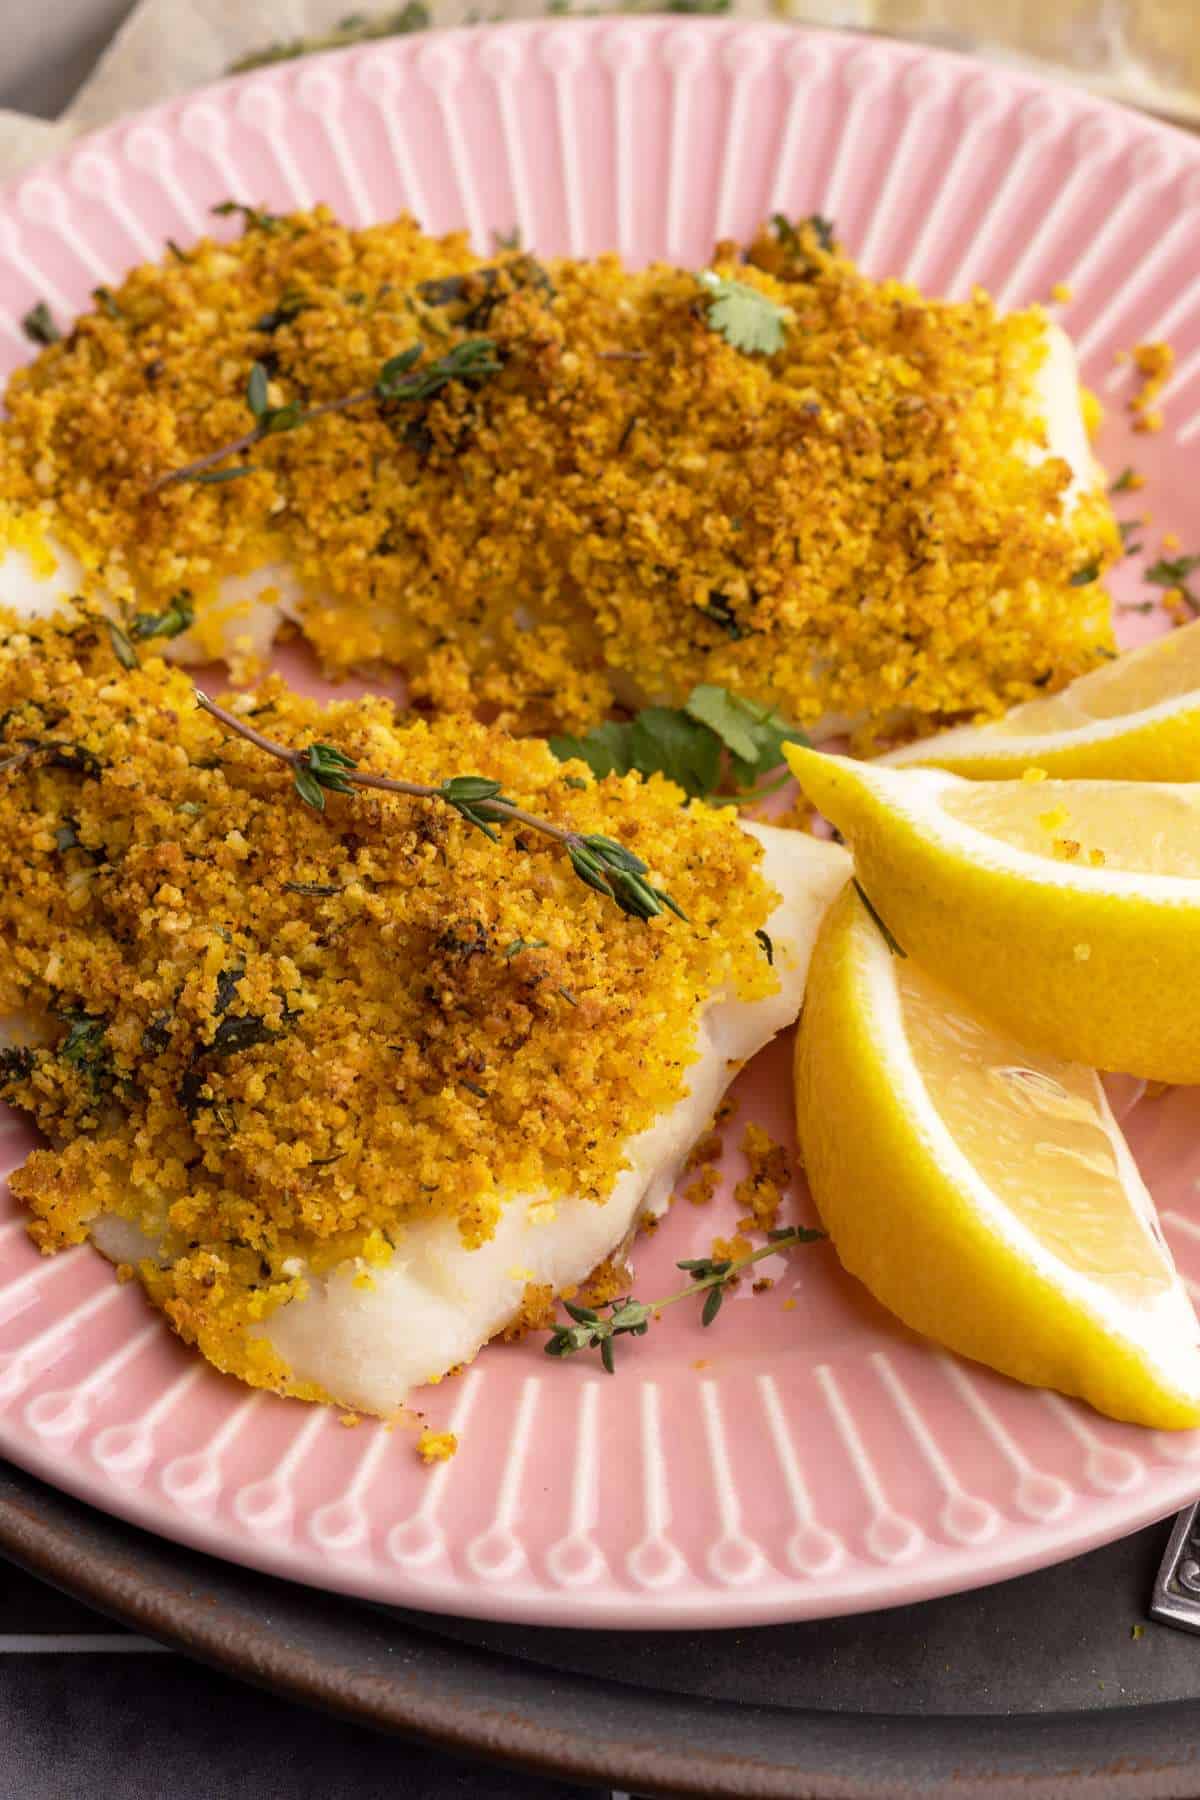 Baked cod with panko on plate closeup.